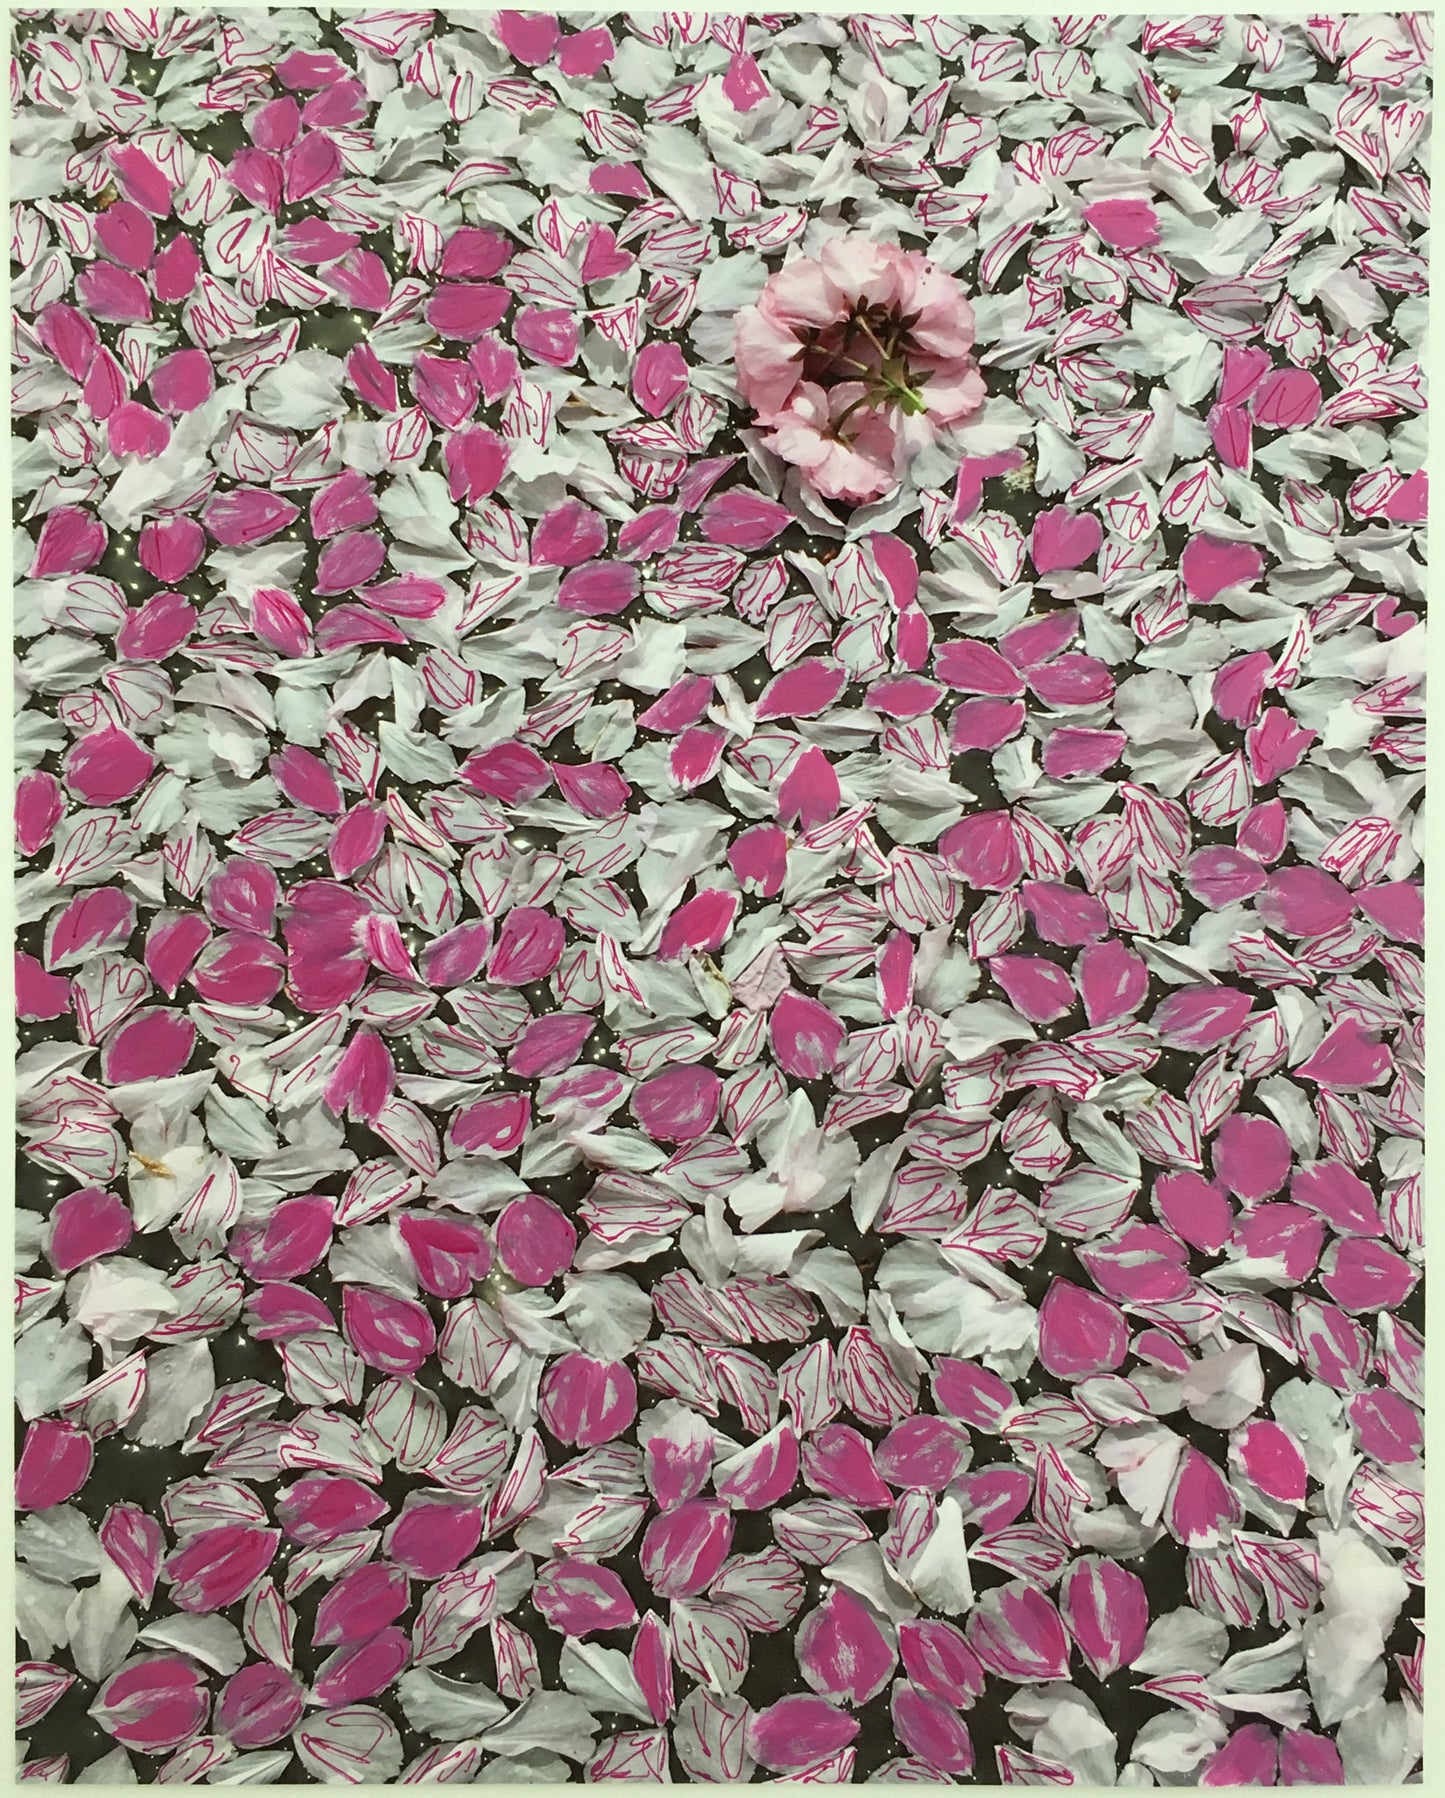 Pink Petals, Blossoms In A Puddle On Roosevelt Island